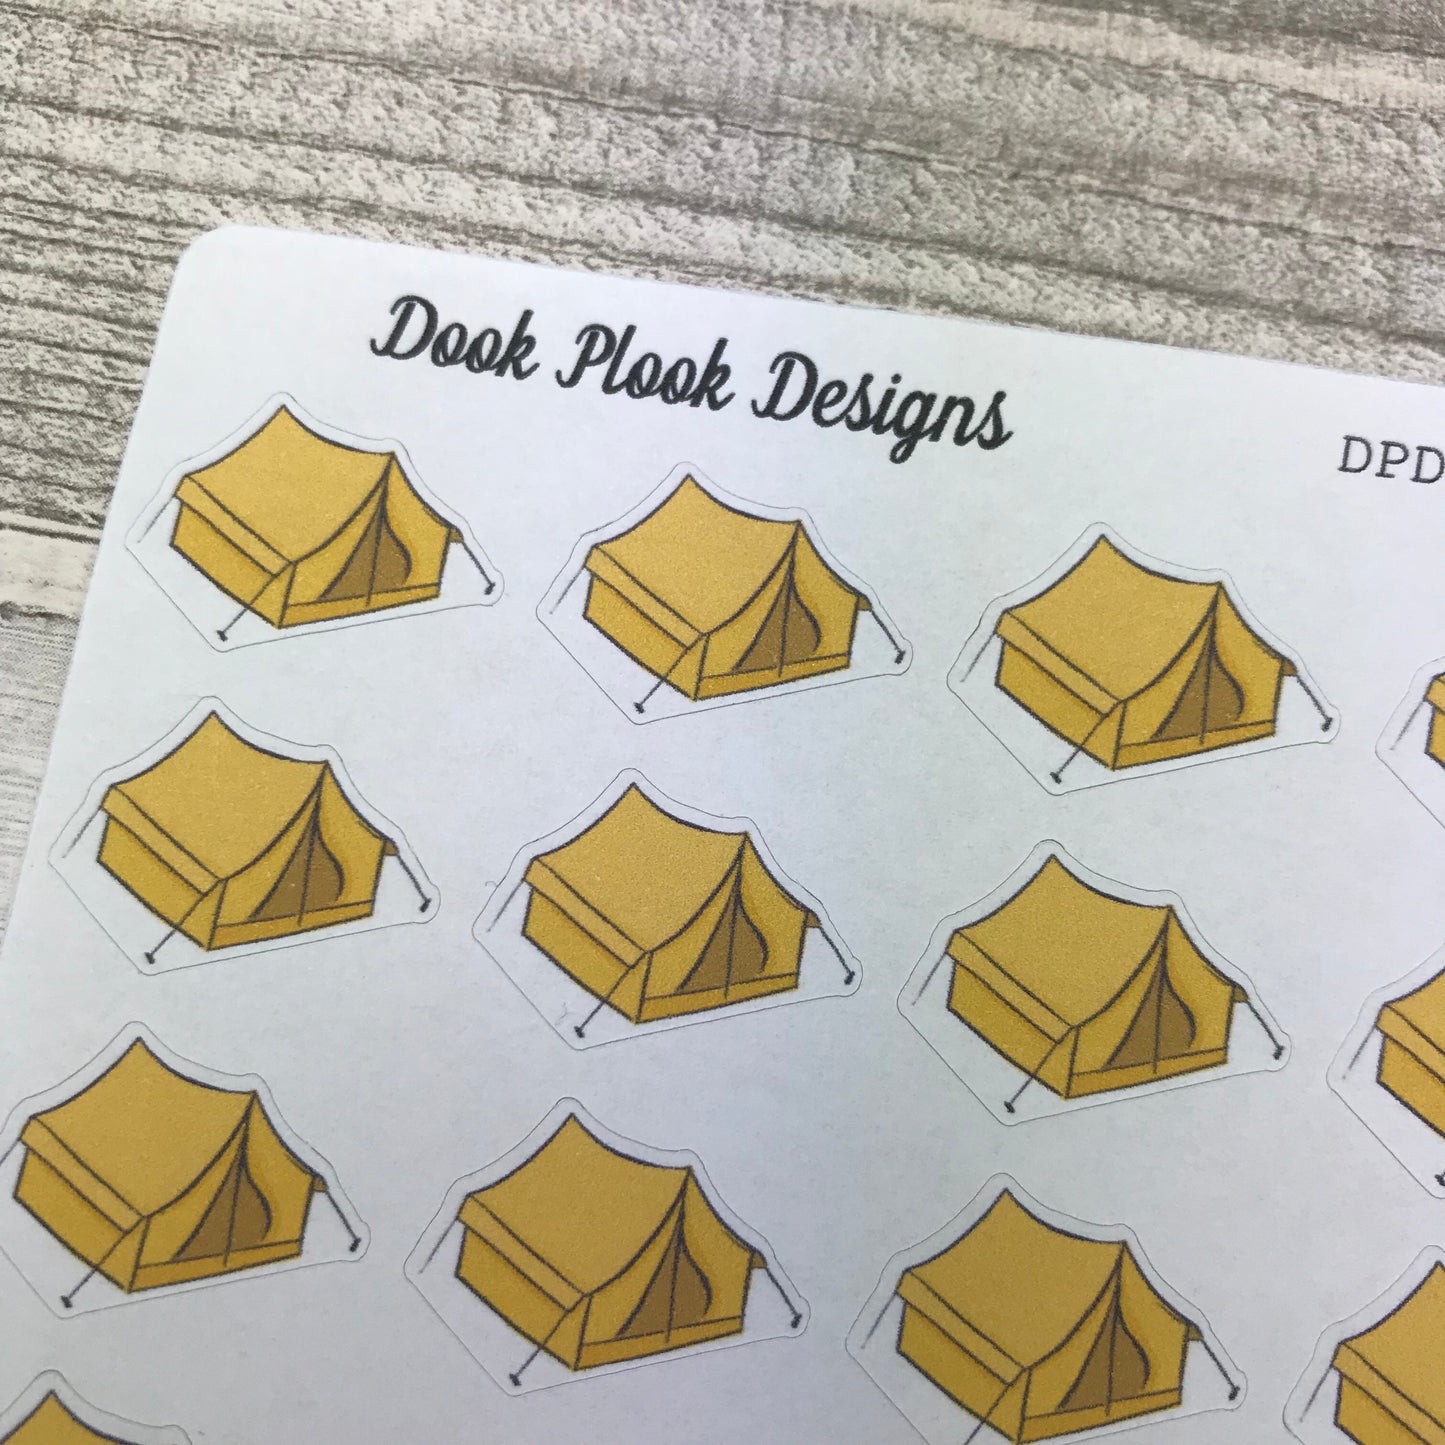 Tent stickers (DPD598)